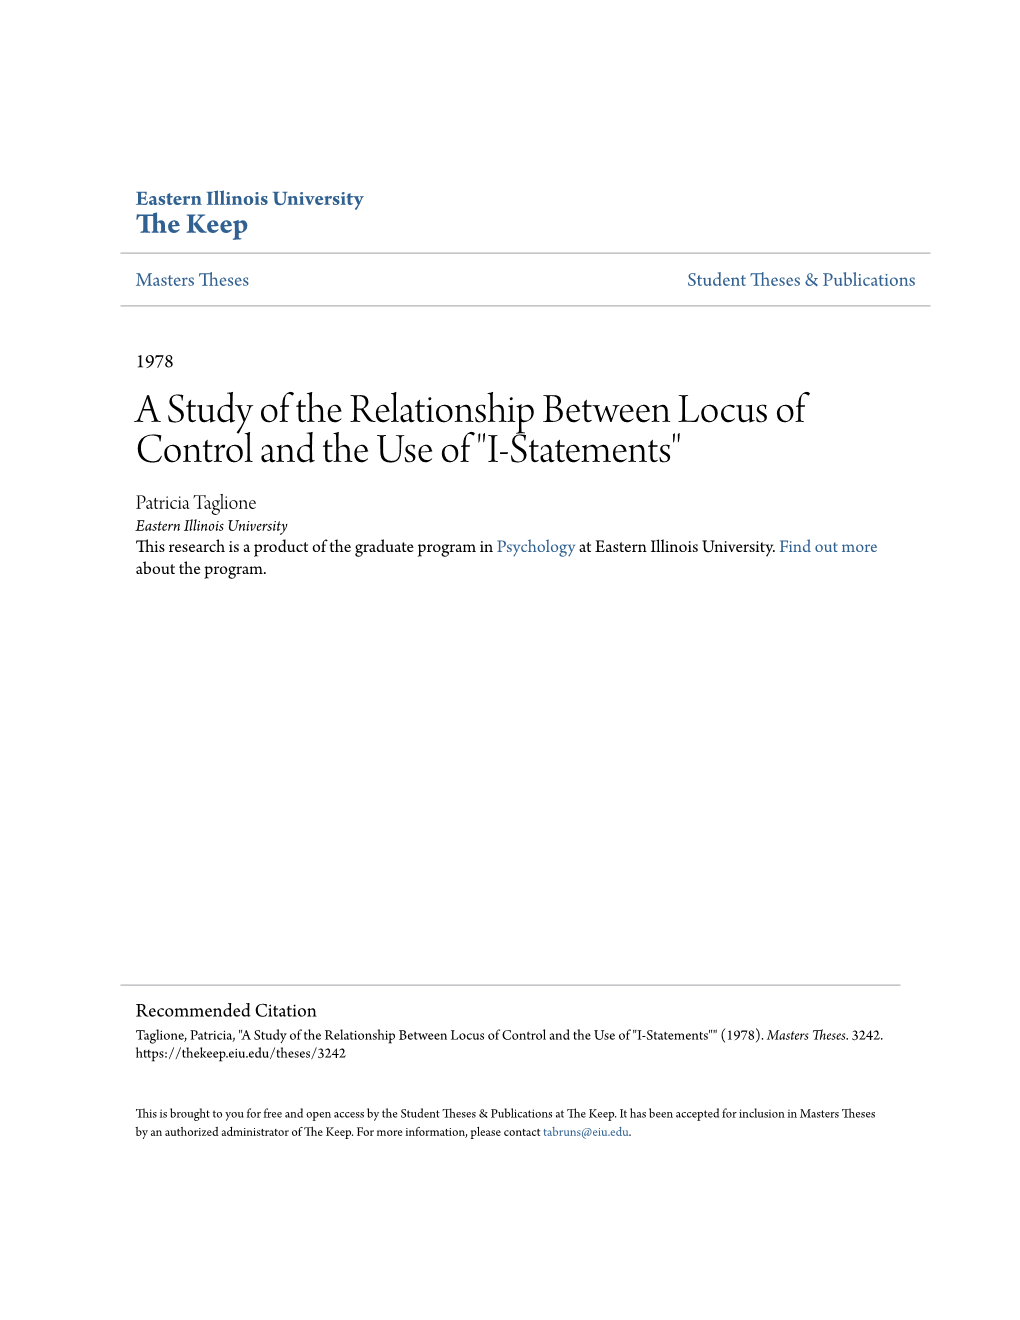 A Study of the Relationship Between Locus of Control and the Use Of